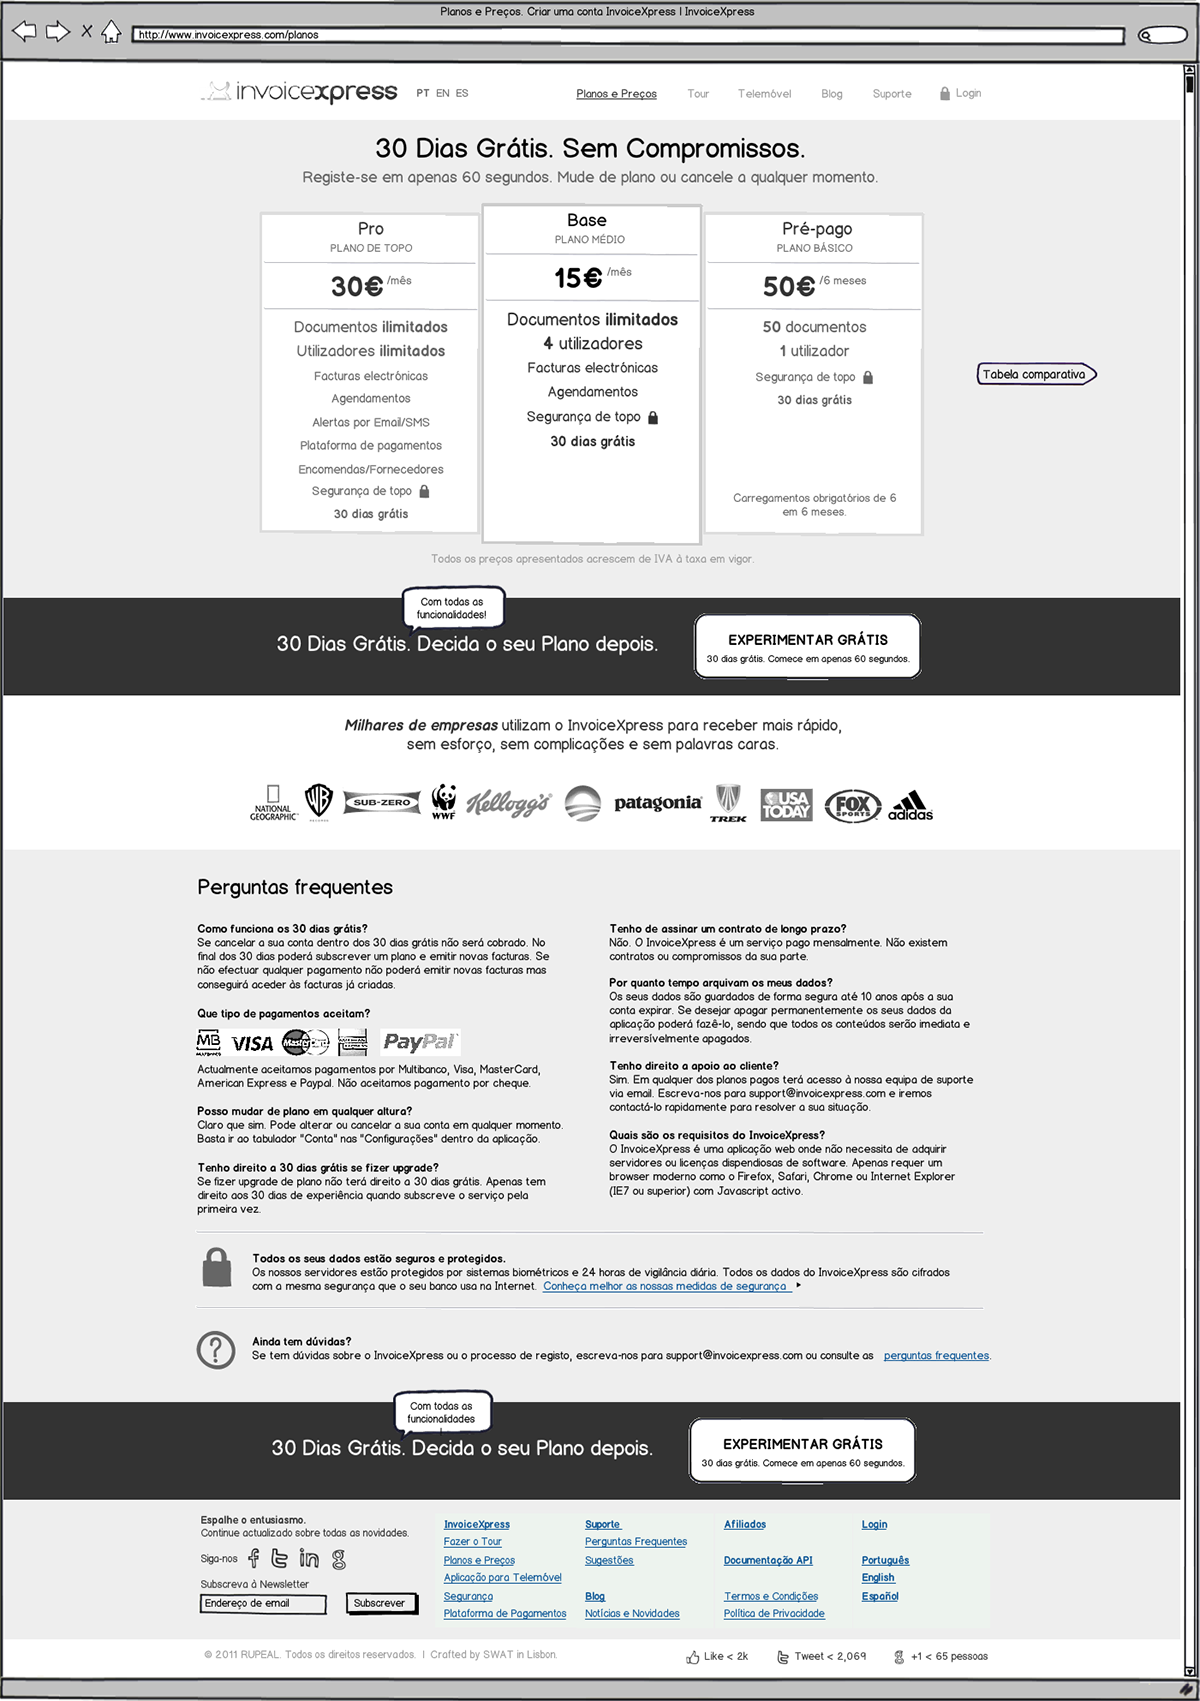 invoicexpress rupeal invoicing SAAS Website redesign wireframes sketches mockups